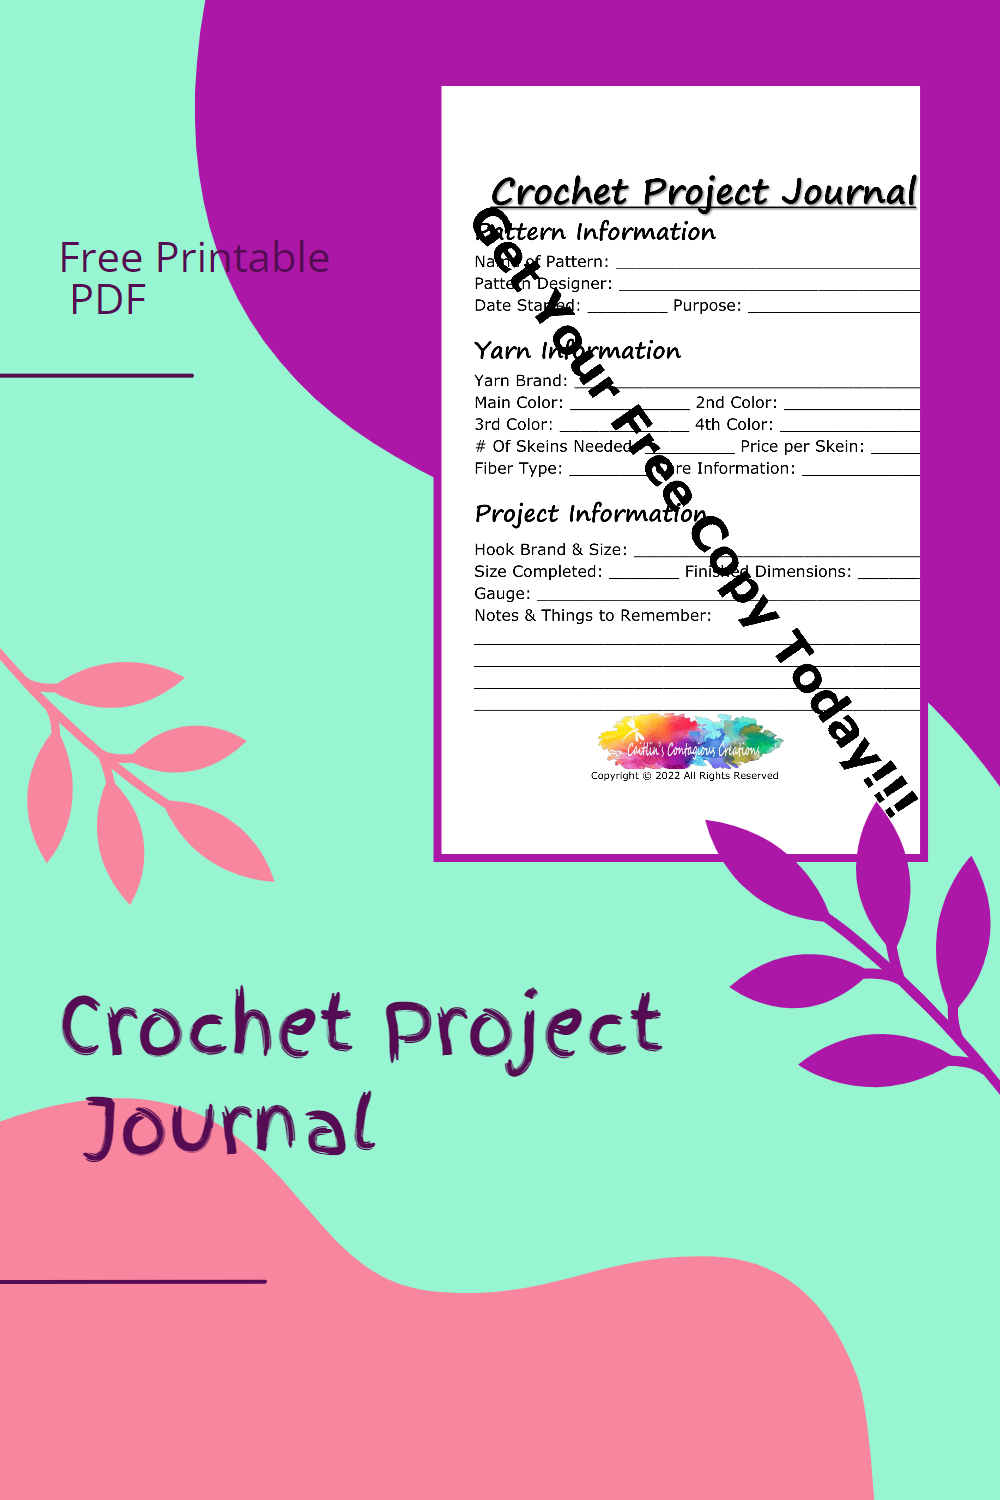 crochet project journal page printable pinterest image 1